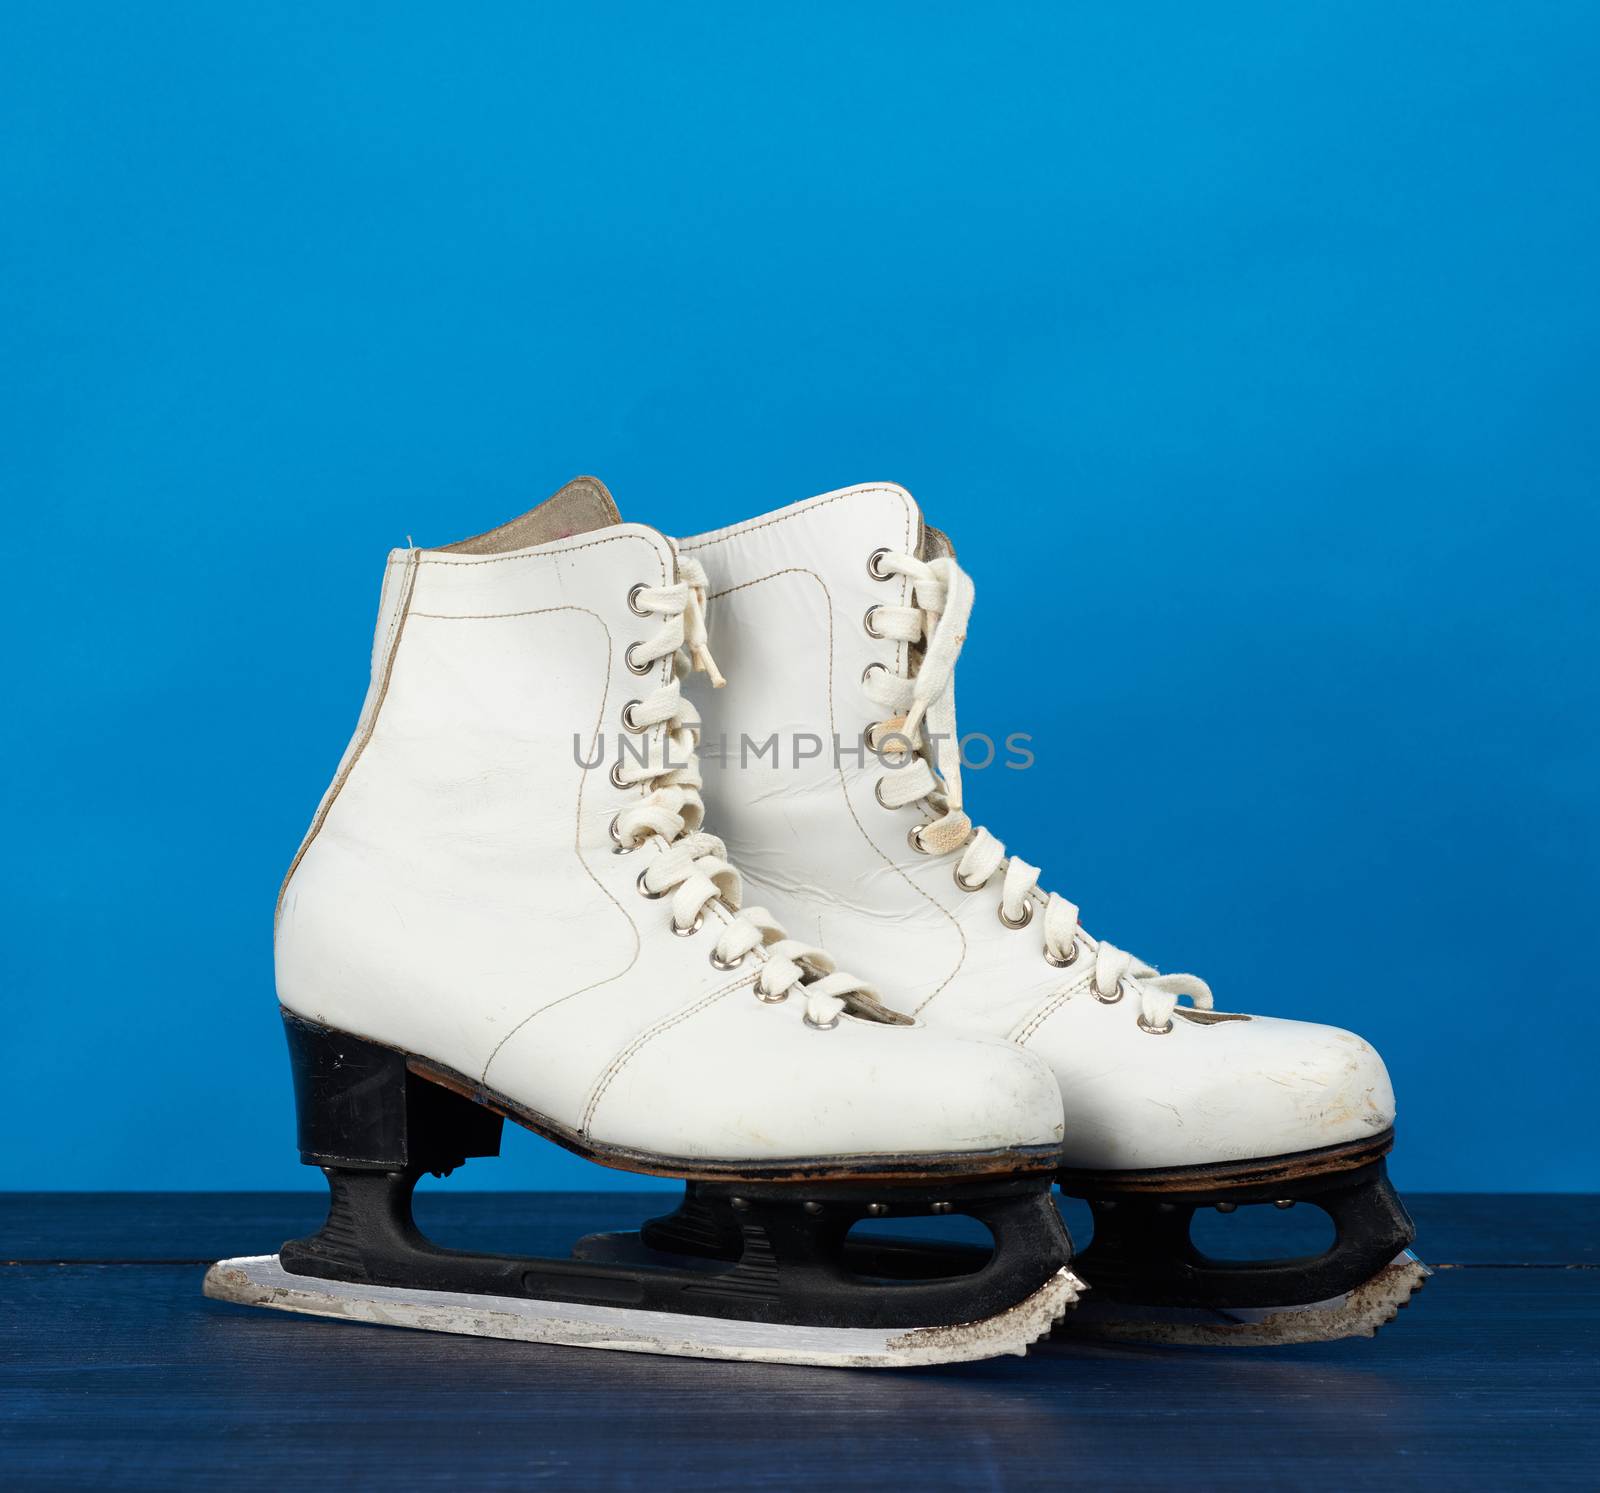 white leather skates for figure skating stand on a blue wooden b by ndanko